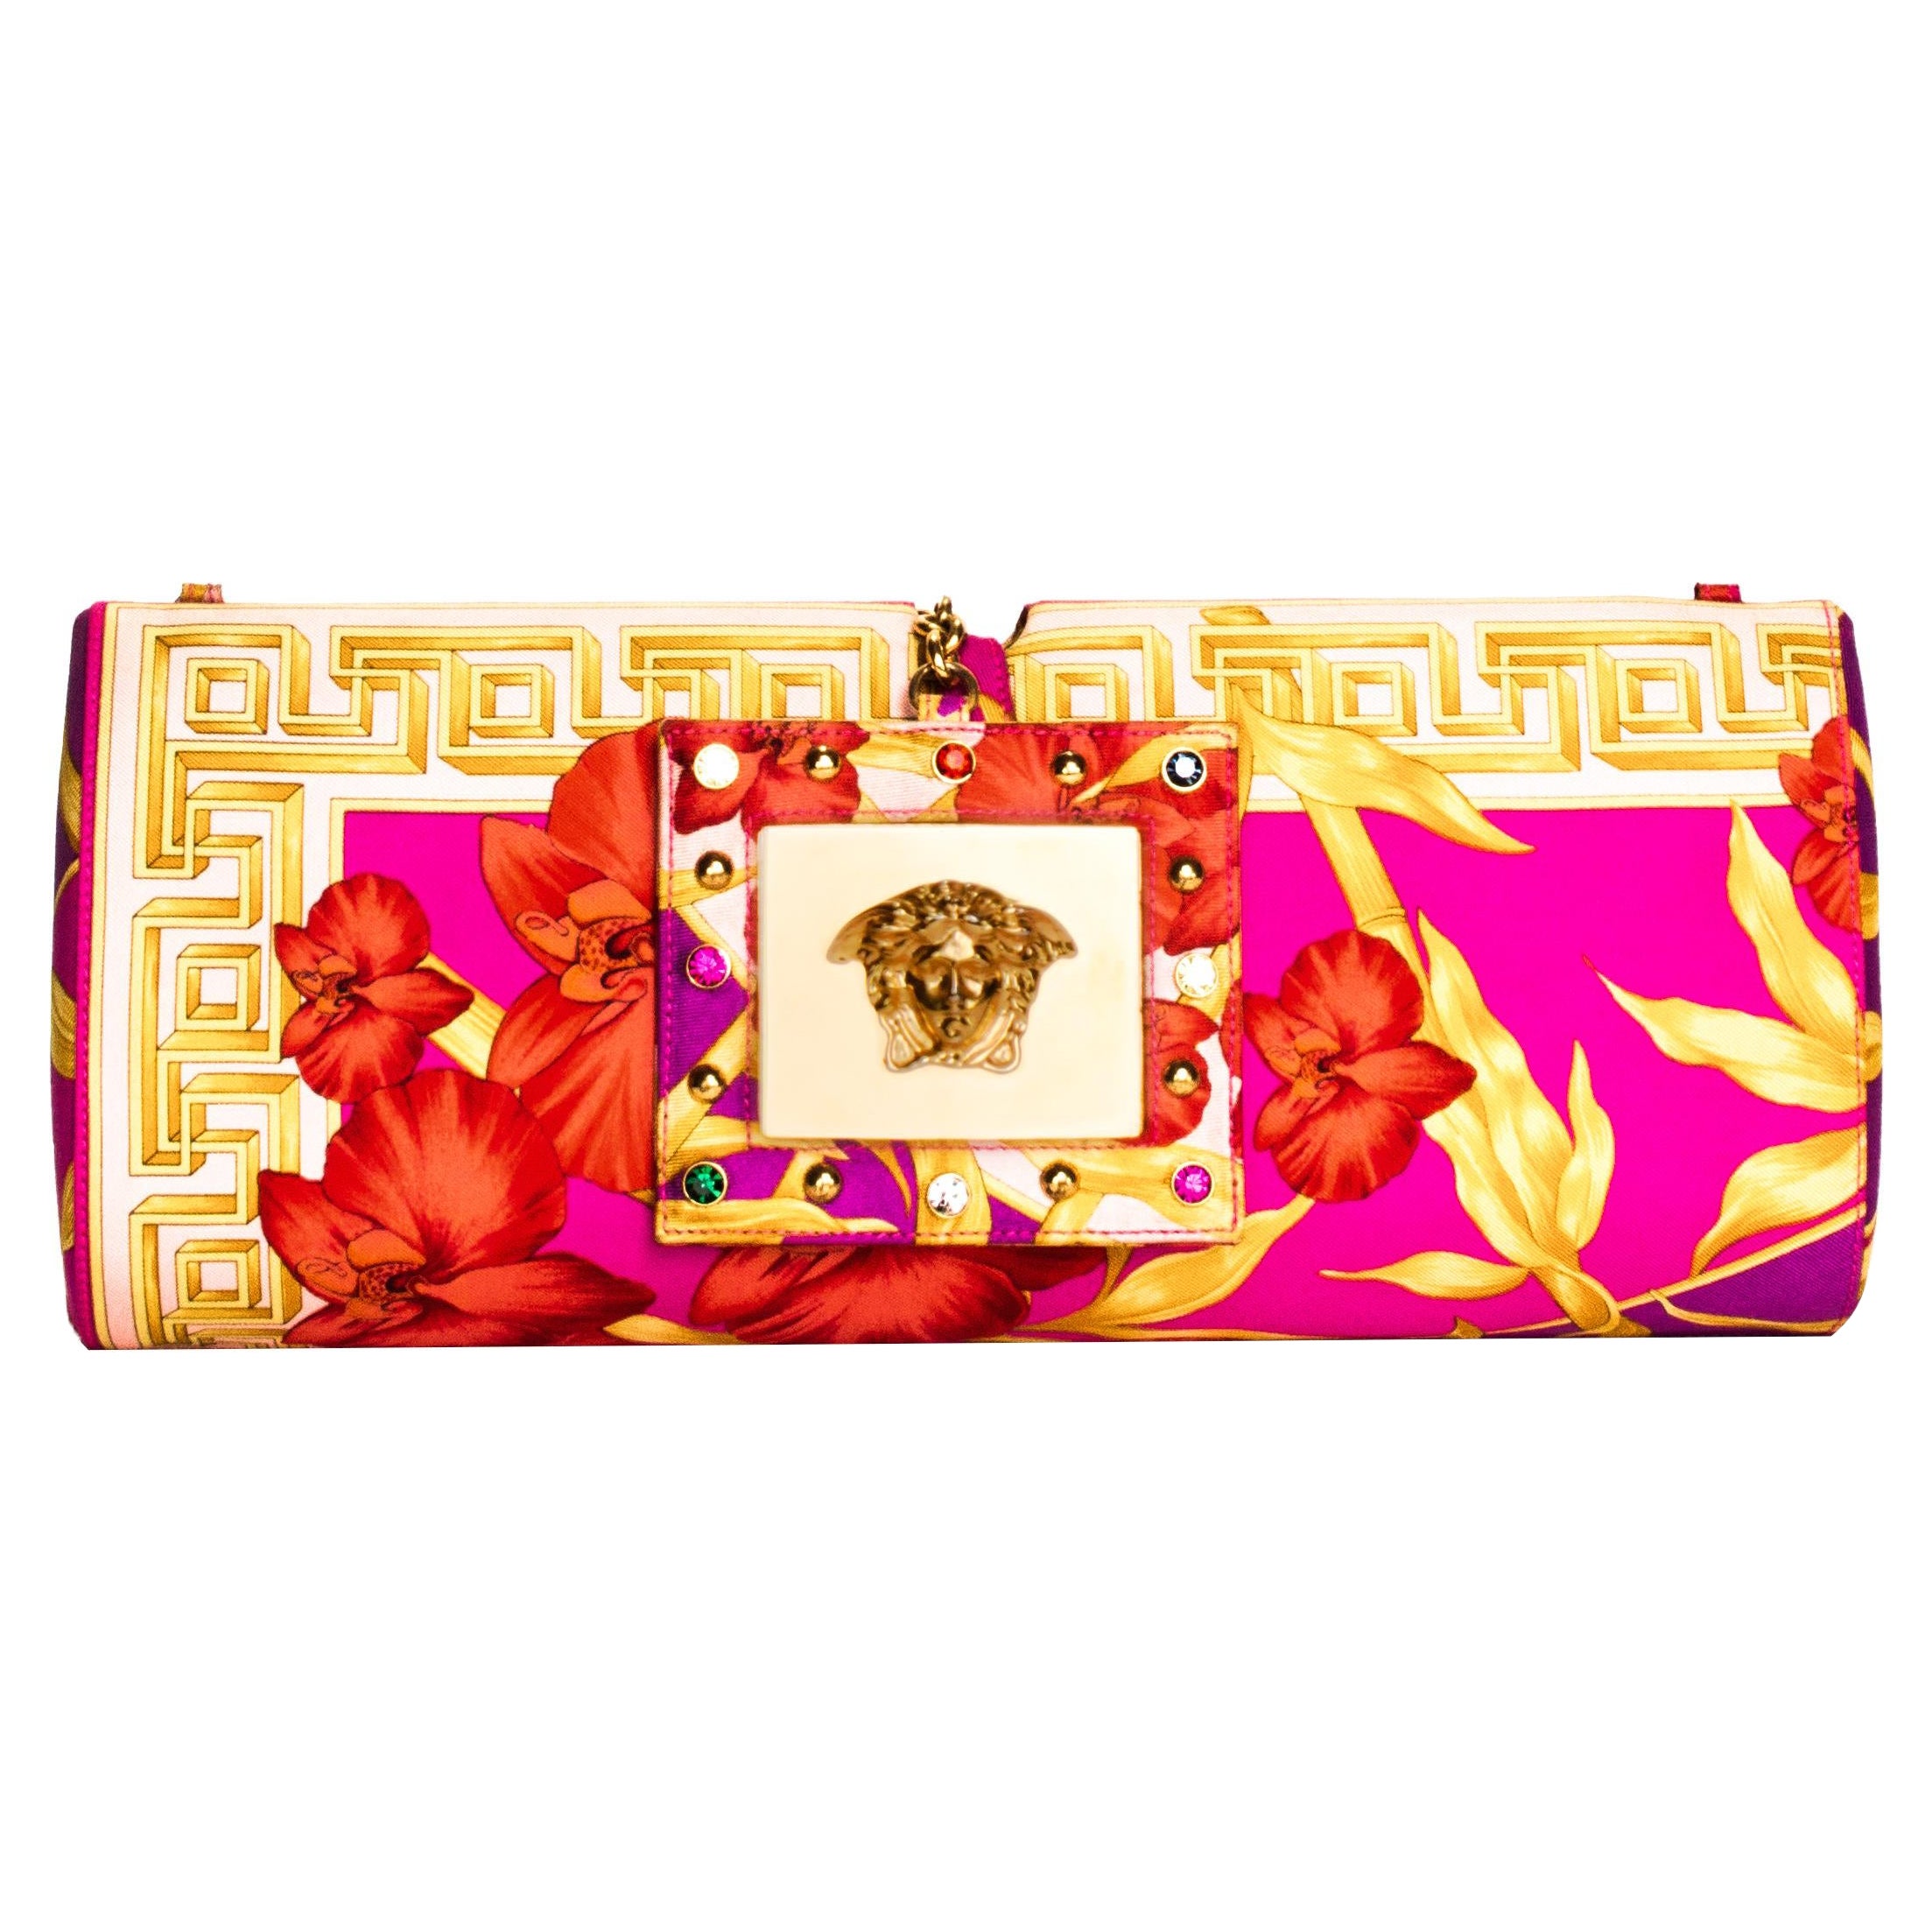 Gianni Versace Pink Jungle Print Convertible Evening Bag & Clutch For Sale